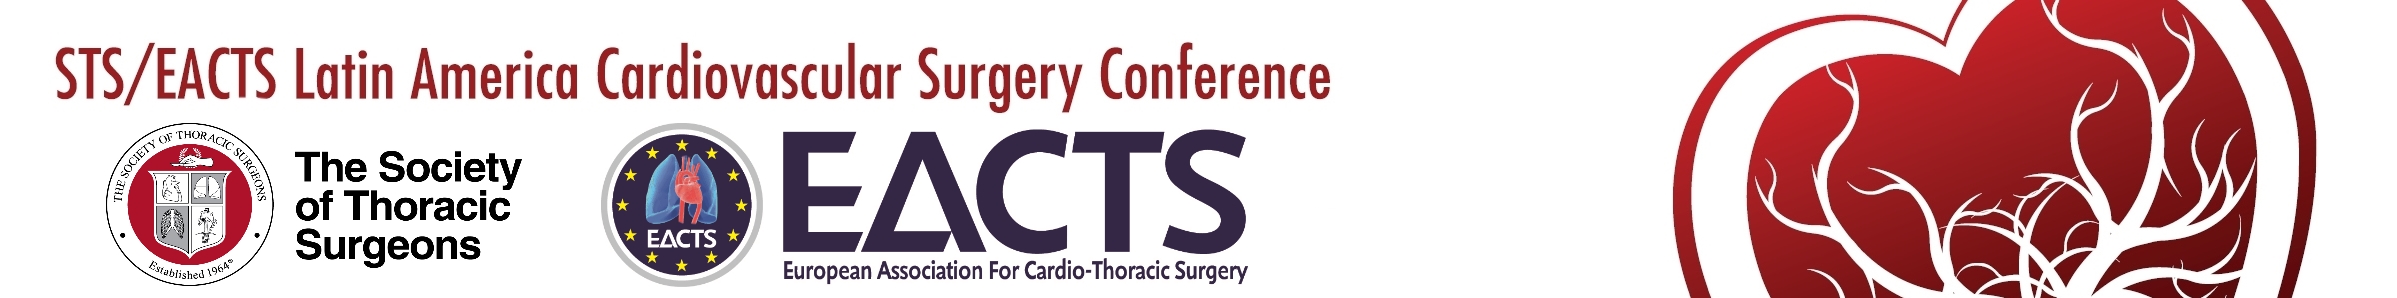 STS/EACTS Latin America Cardiovascular Surgery Conference